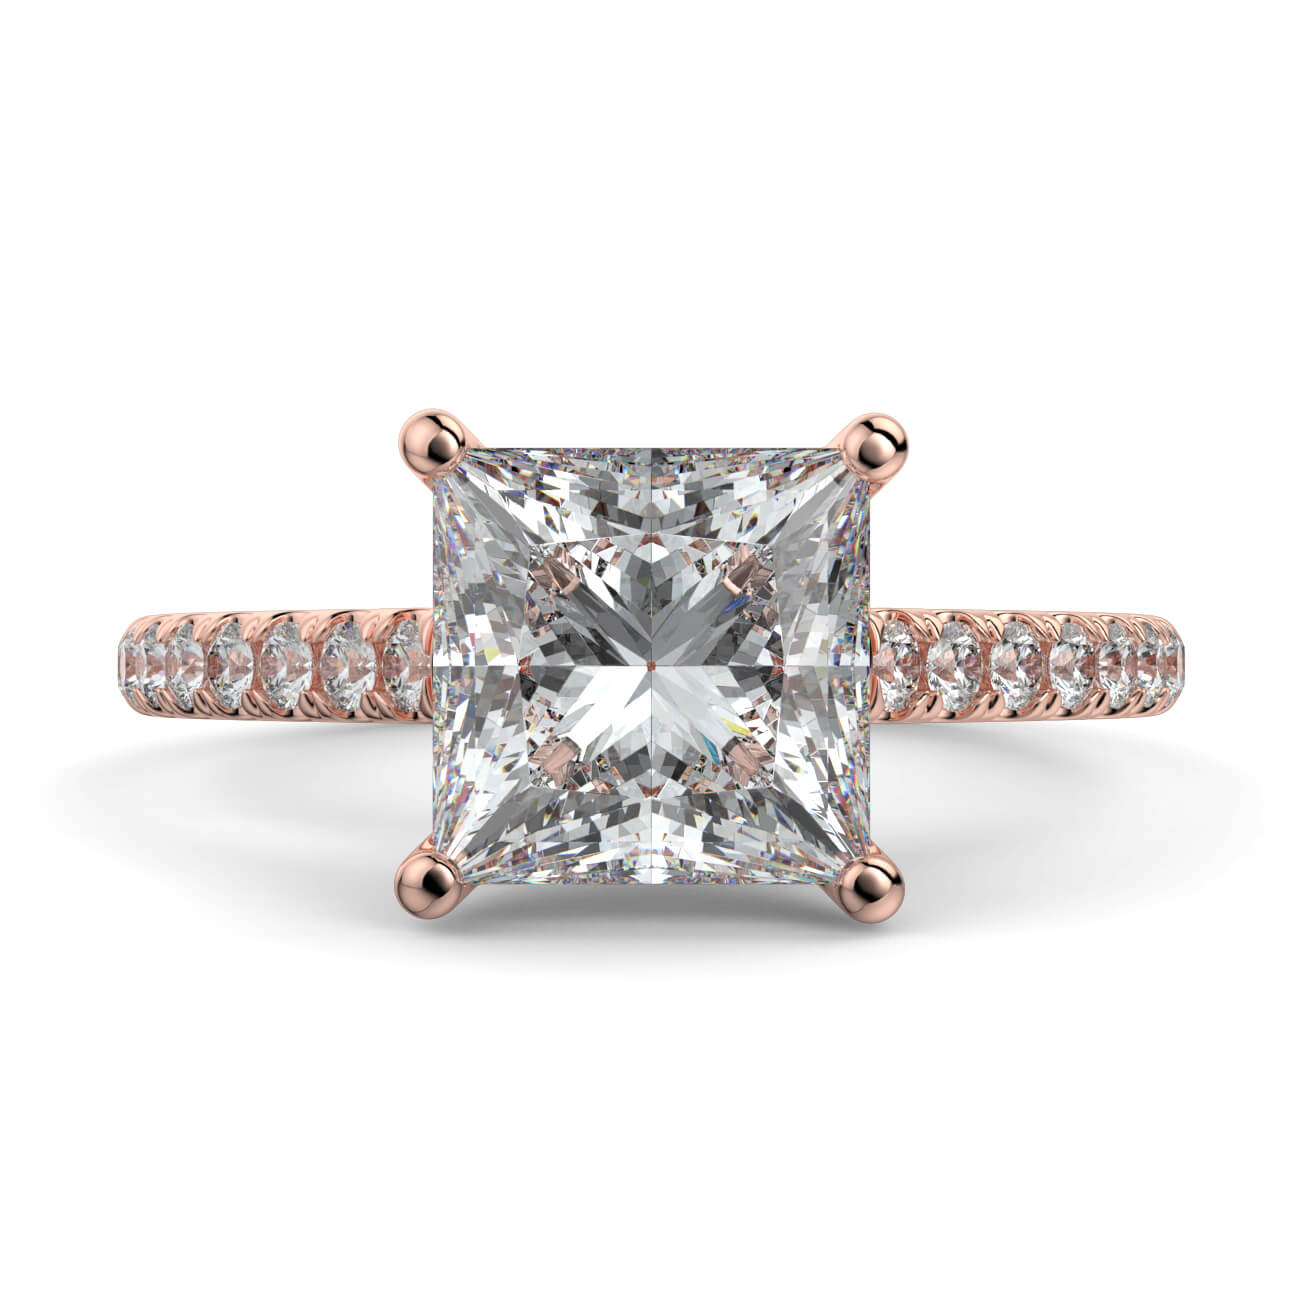 Princess Cut diamond cathedral engagement ring in rose gold – Australian Diamond Network